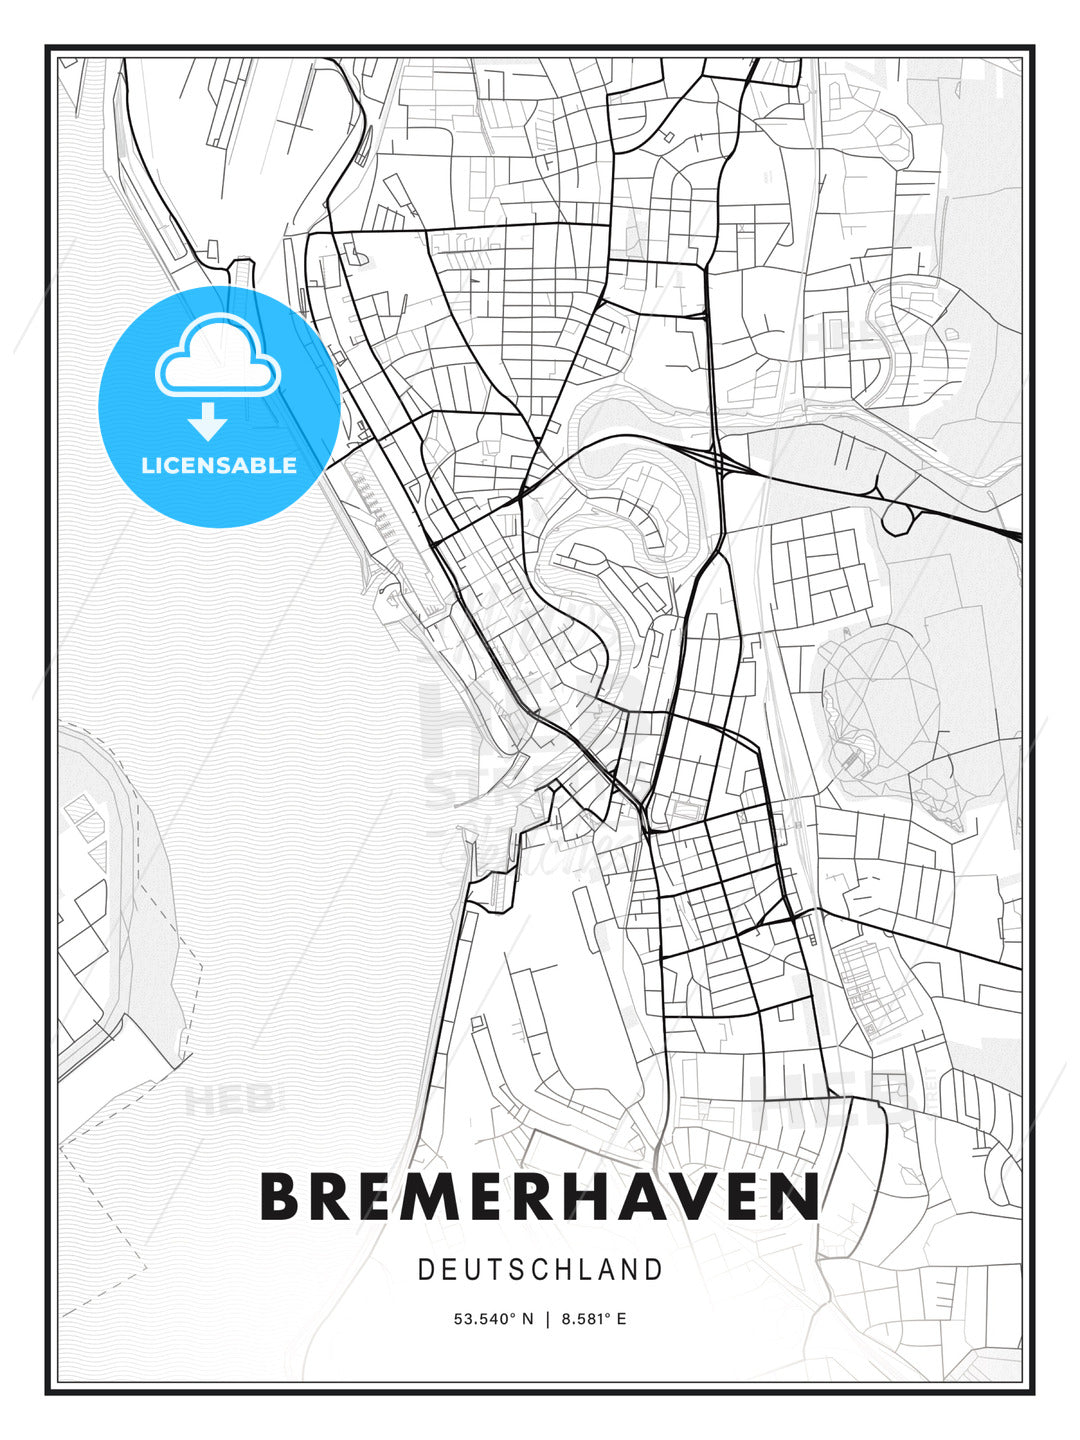 Bremerhaven, Germany, Modern Print Template in Various Formats - HEBSTREITS Sketches